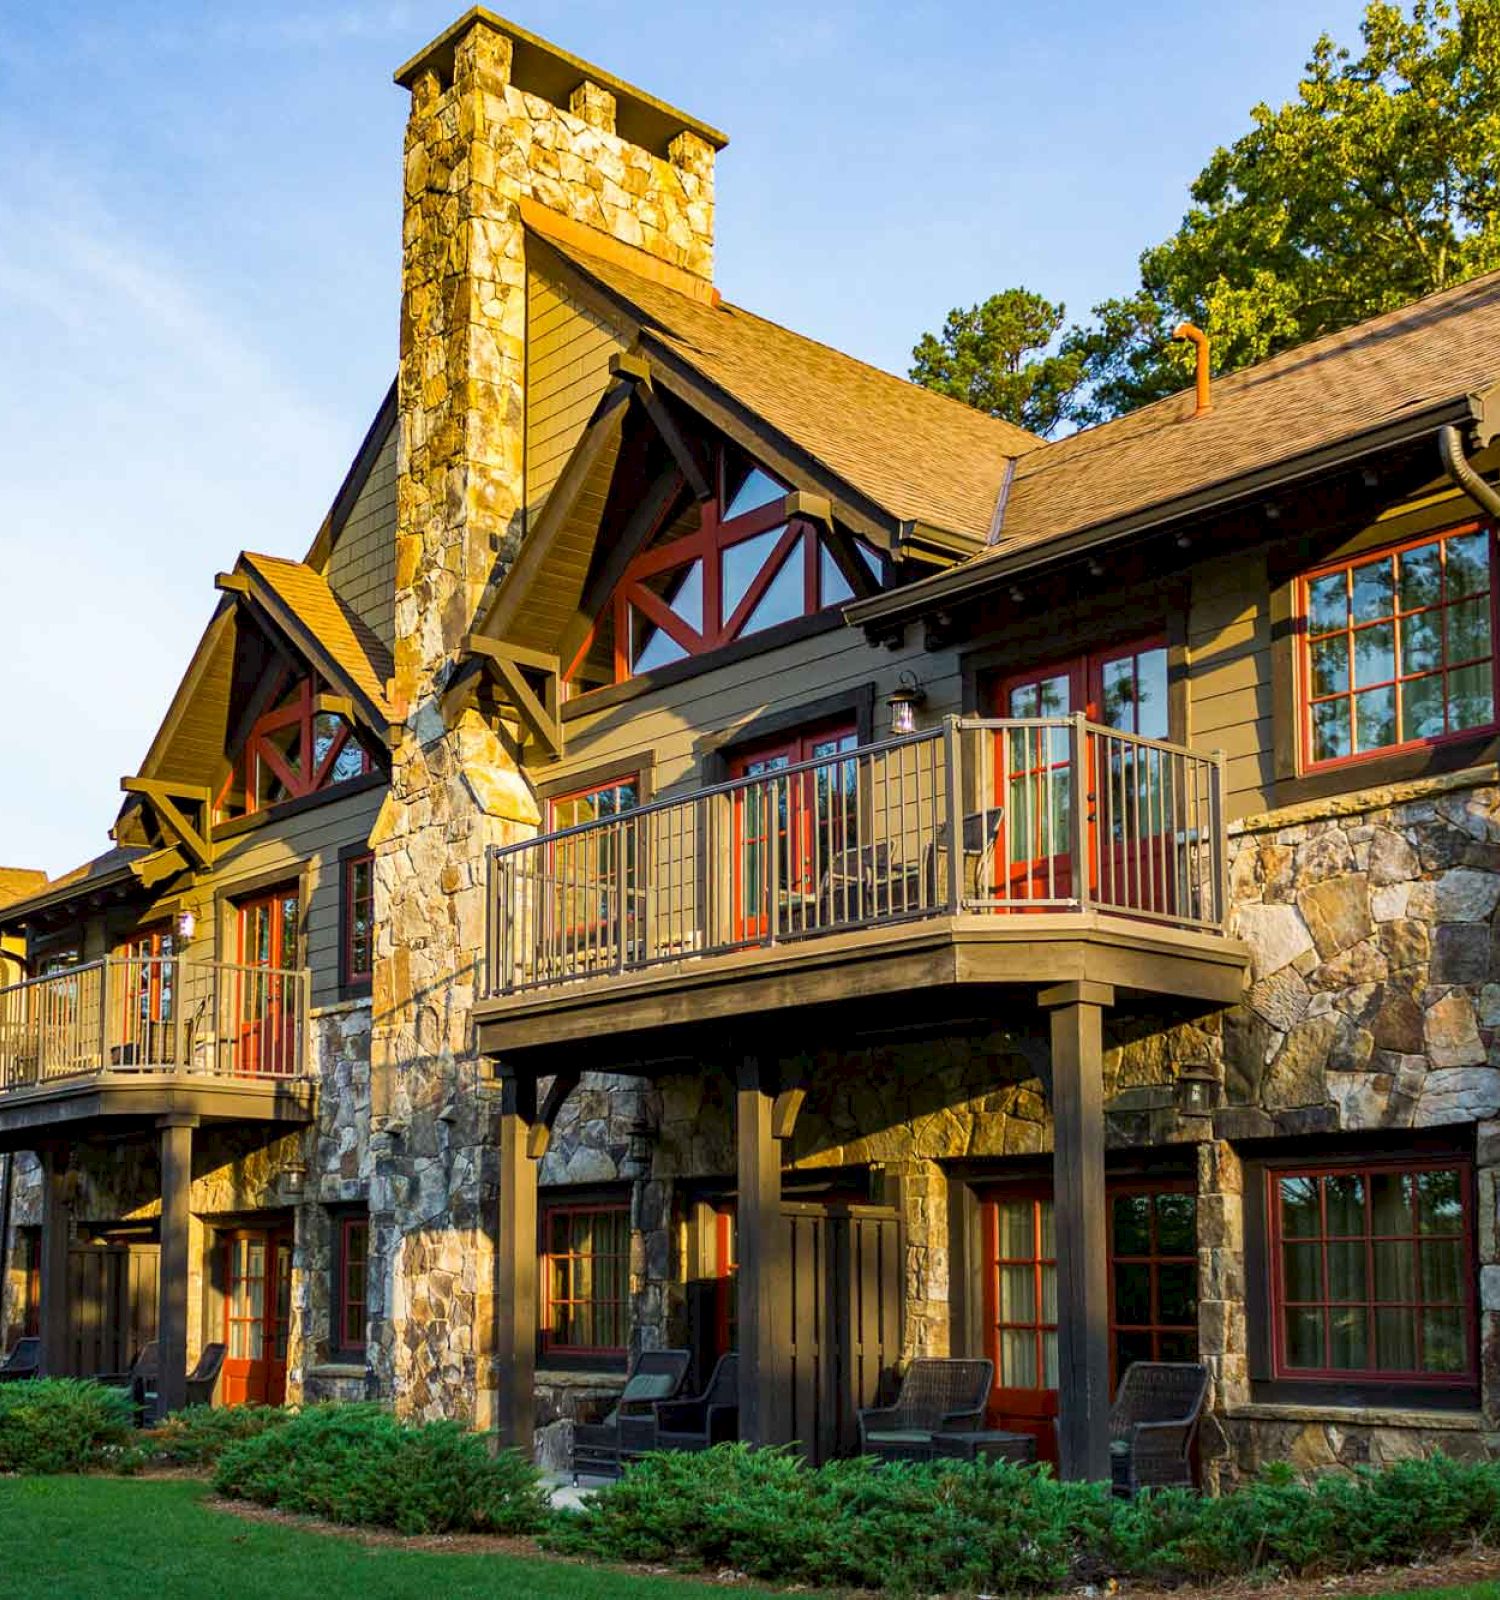 A large house with stone foundation, wooden beams, balconies, and greenery.